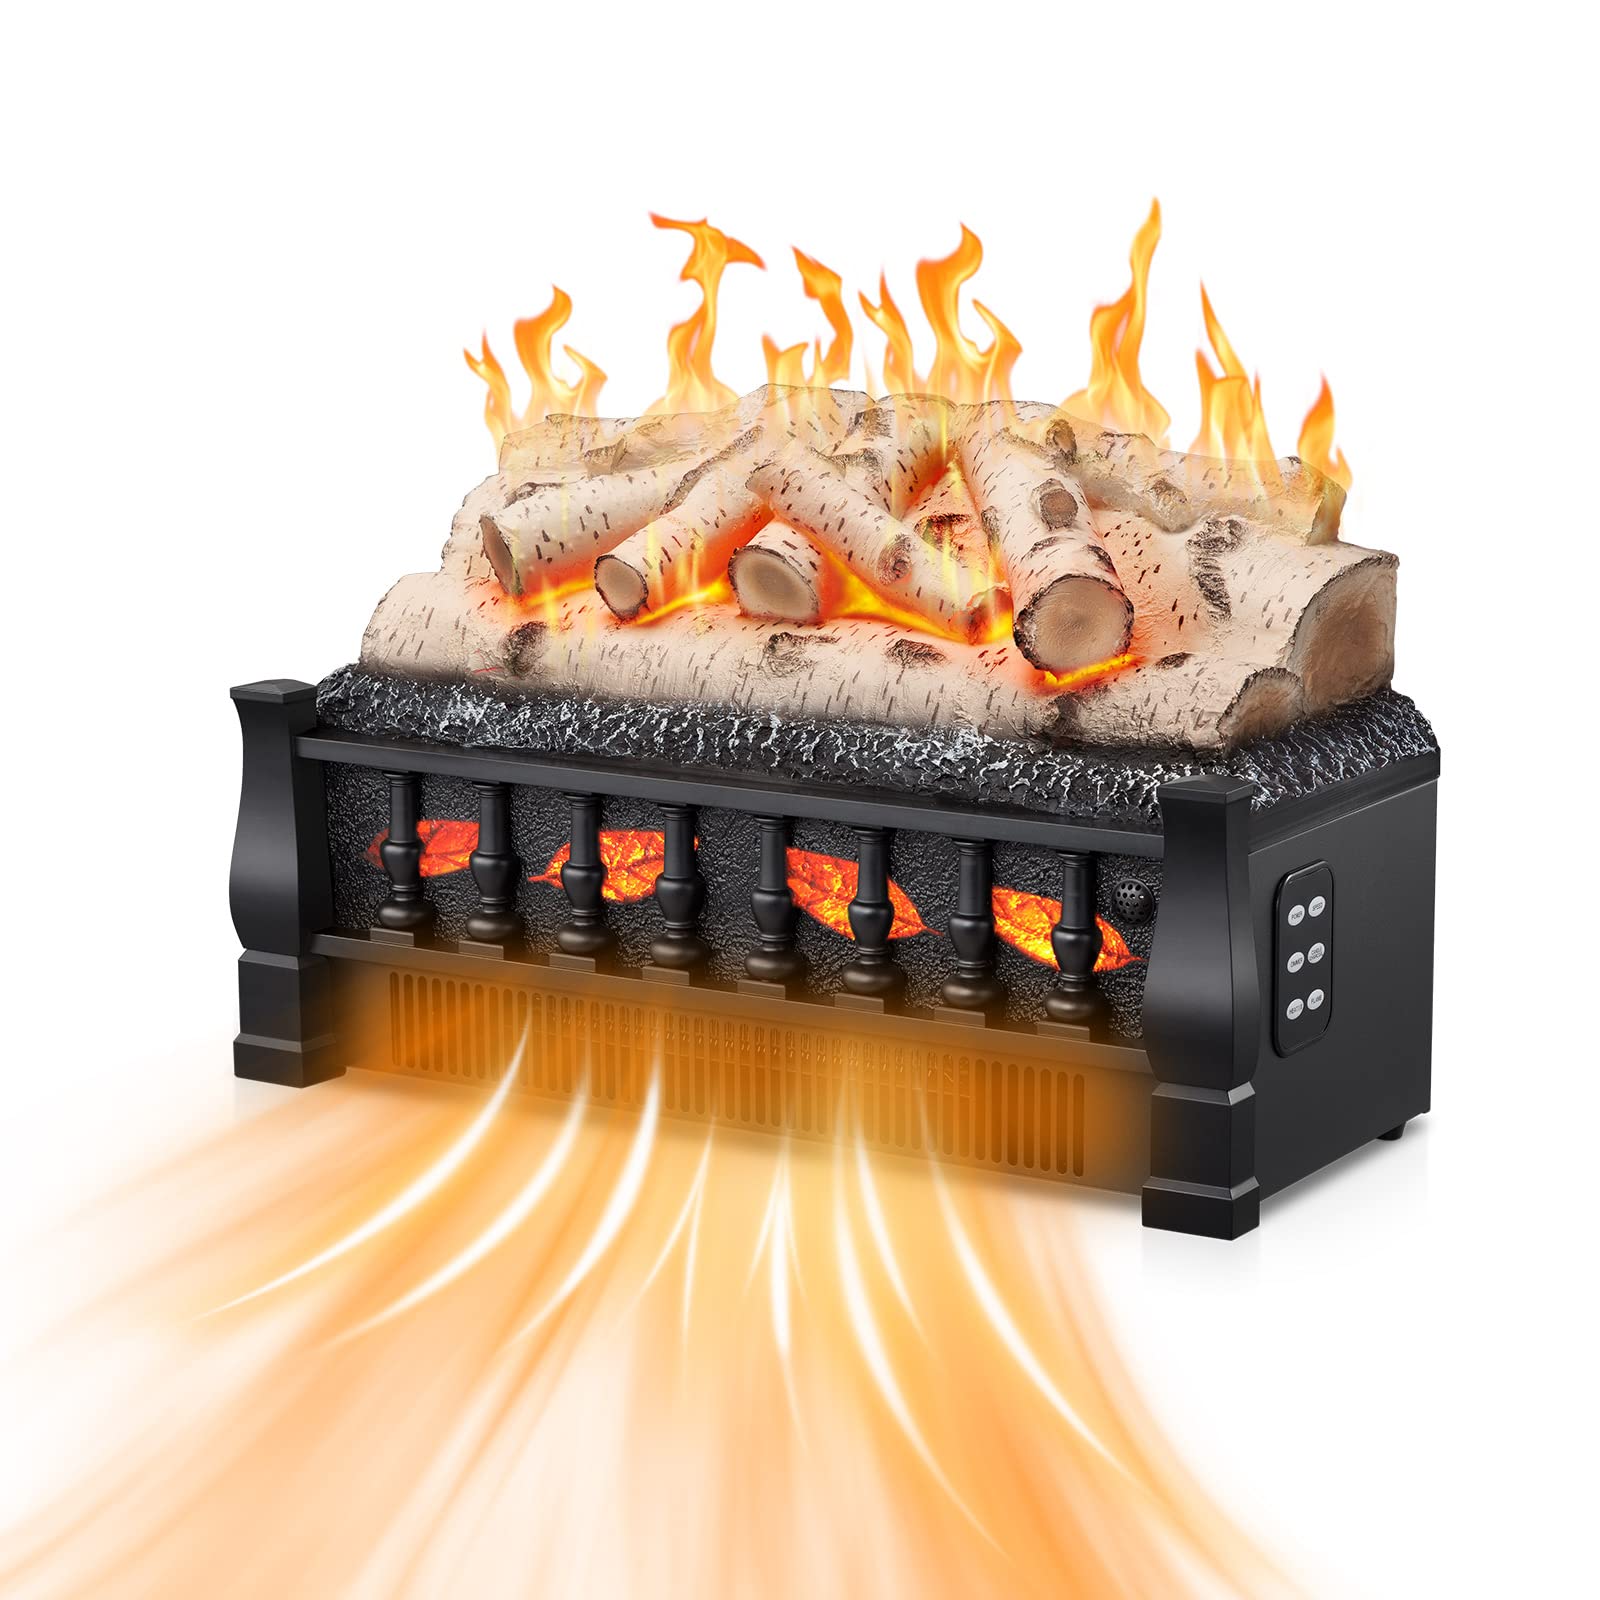 Electric Fireplace Log Heater, Realistic Flame and Ember Bed, Portable, Infrared, Thermostat 750W/1500W…